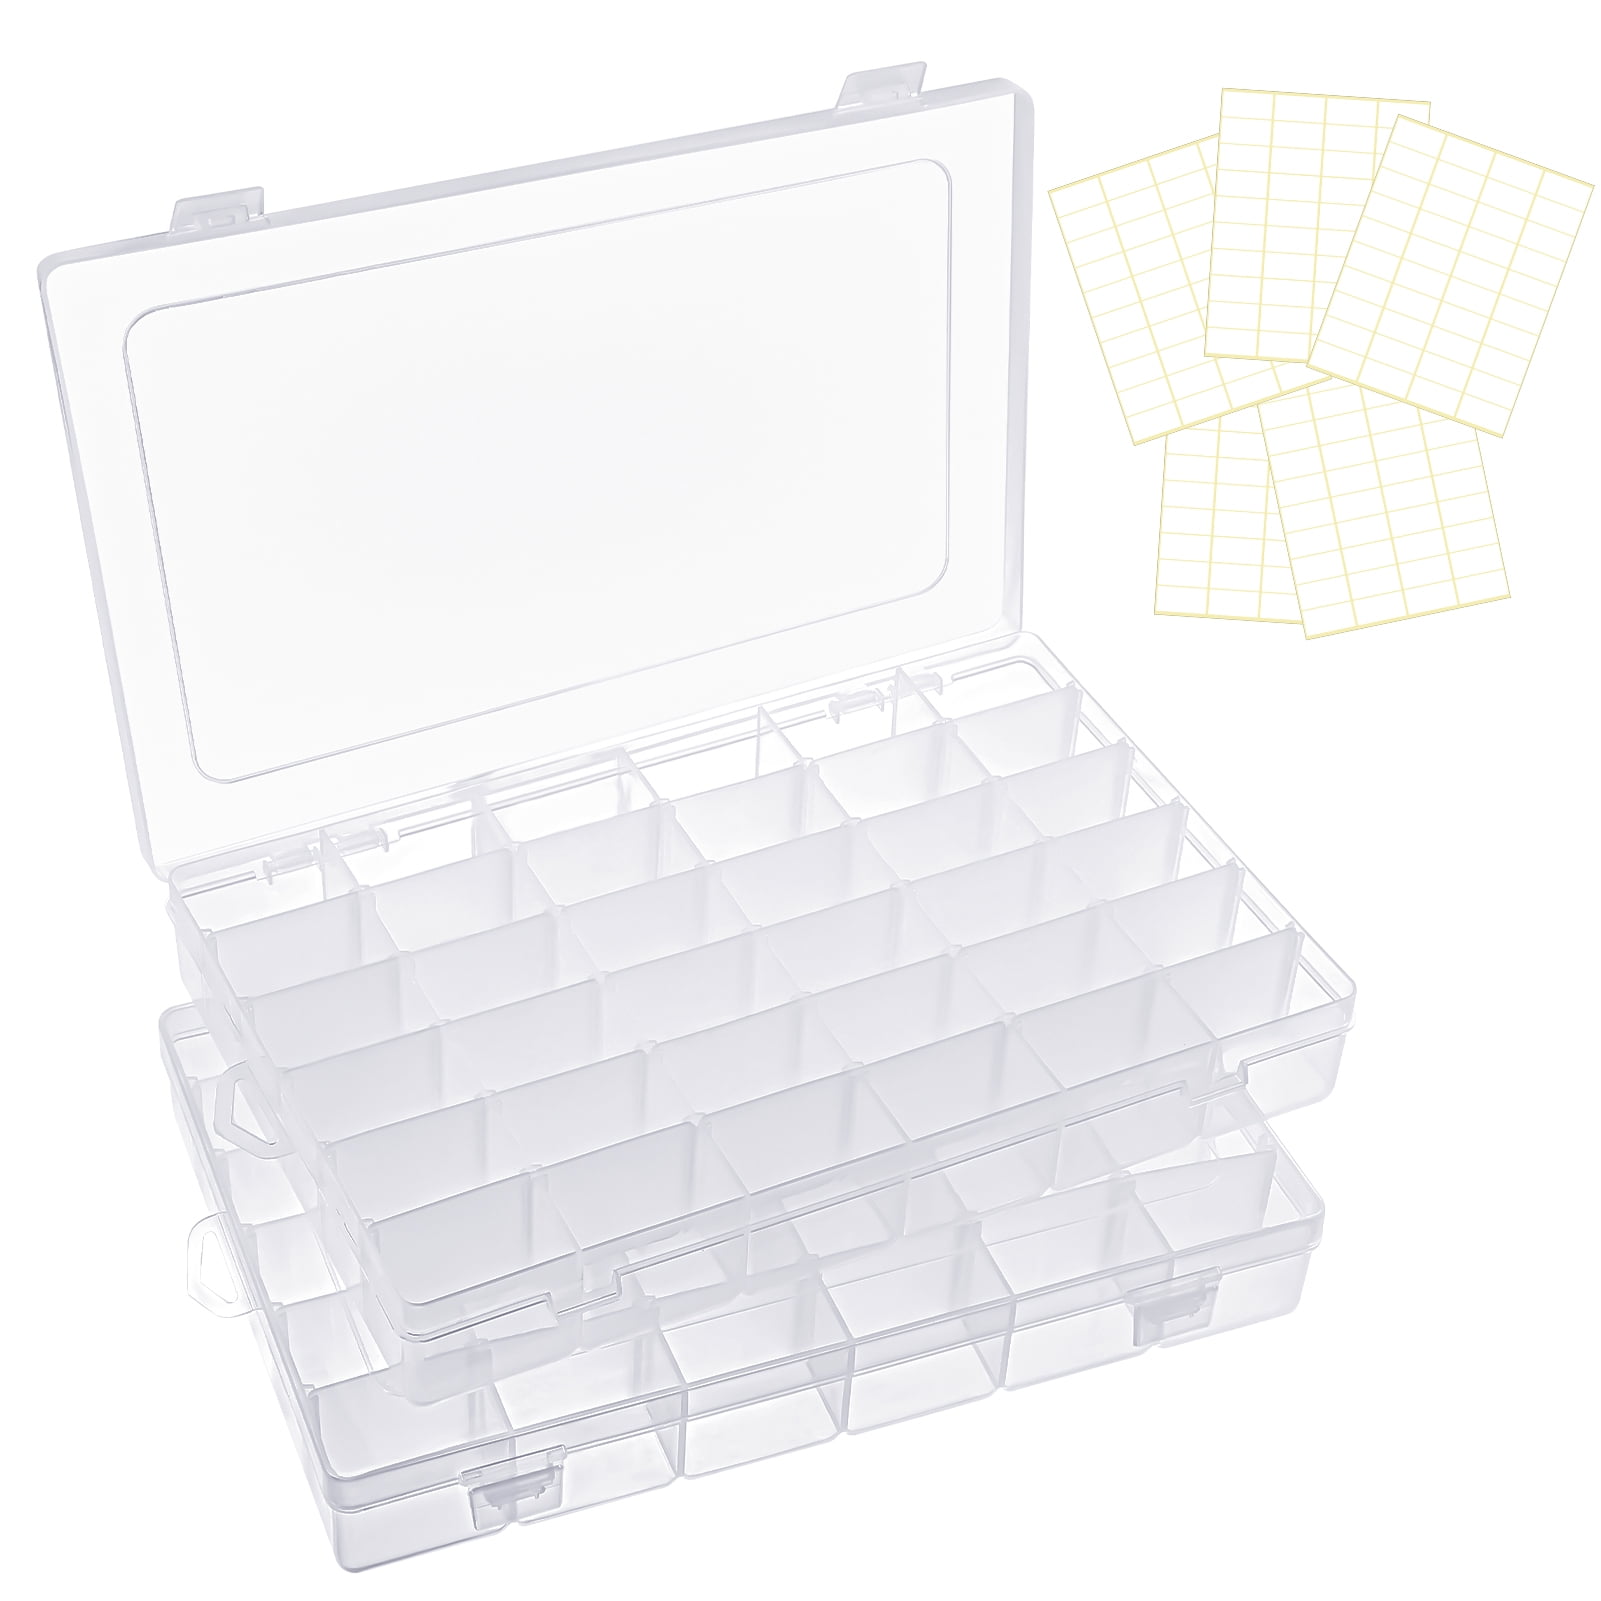  Bead Storage Solutions Elizabeth Ward 45 Piece Stackable  Plastic Organizer Tray with 42 Compartments in Assorted Sizes, Labels, and  Lid (2 Pack) : Arts, Crafts & Sewing